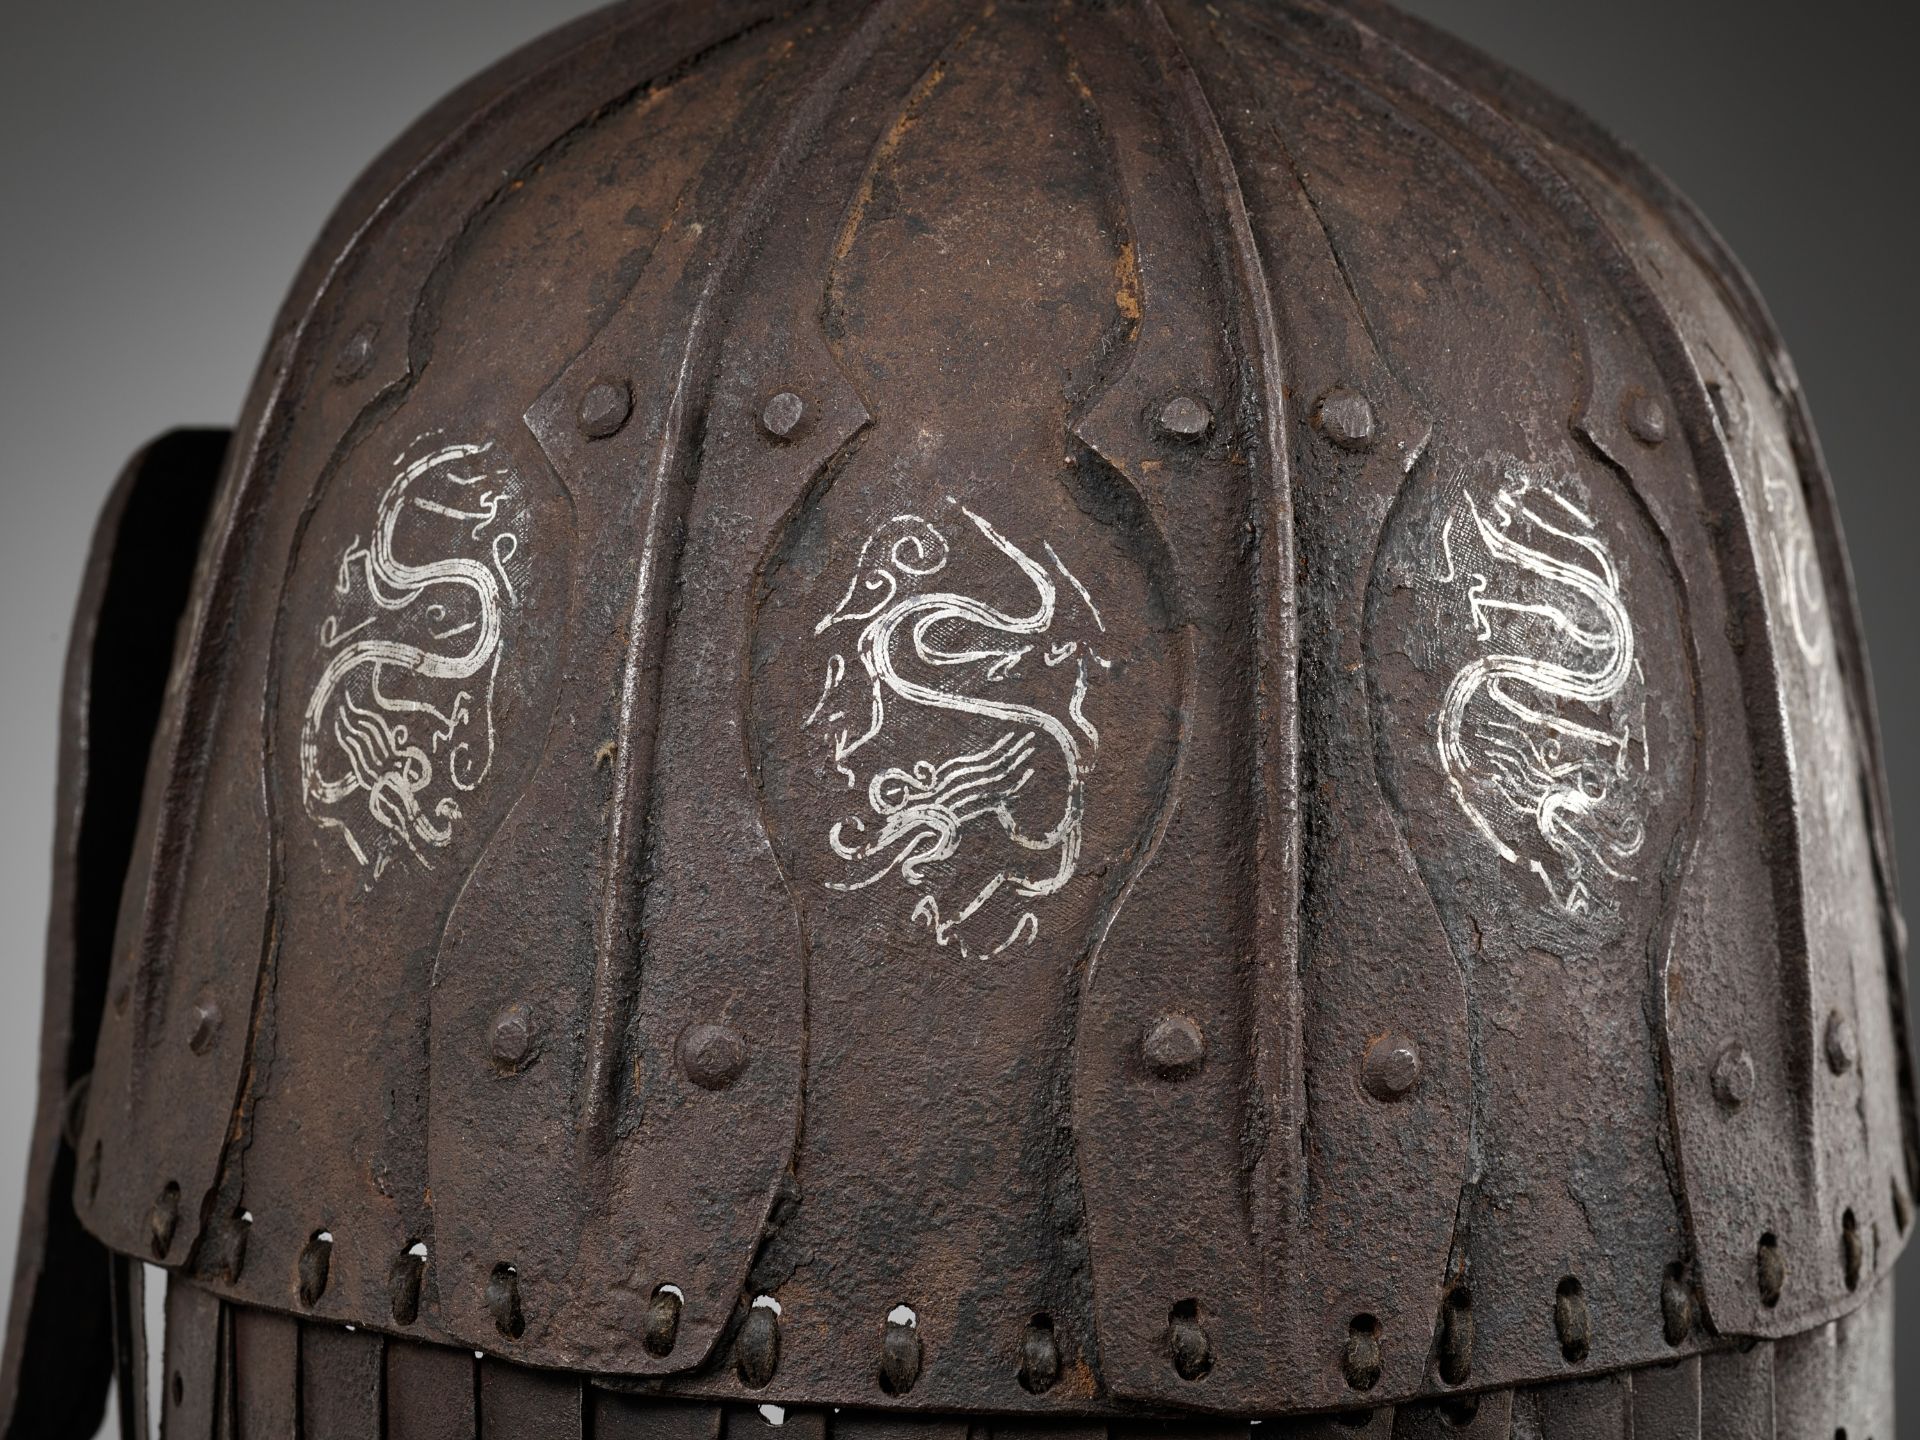 A SILVER-DAMASCENED 'DRAGON' IRON HELMET, 14TH-17TH CENTURY - Image 5 of 9